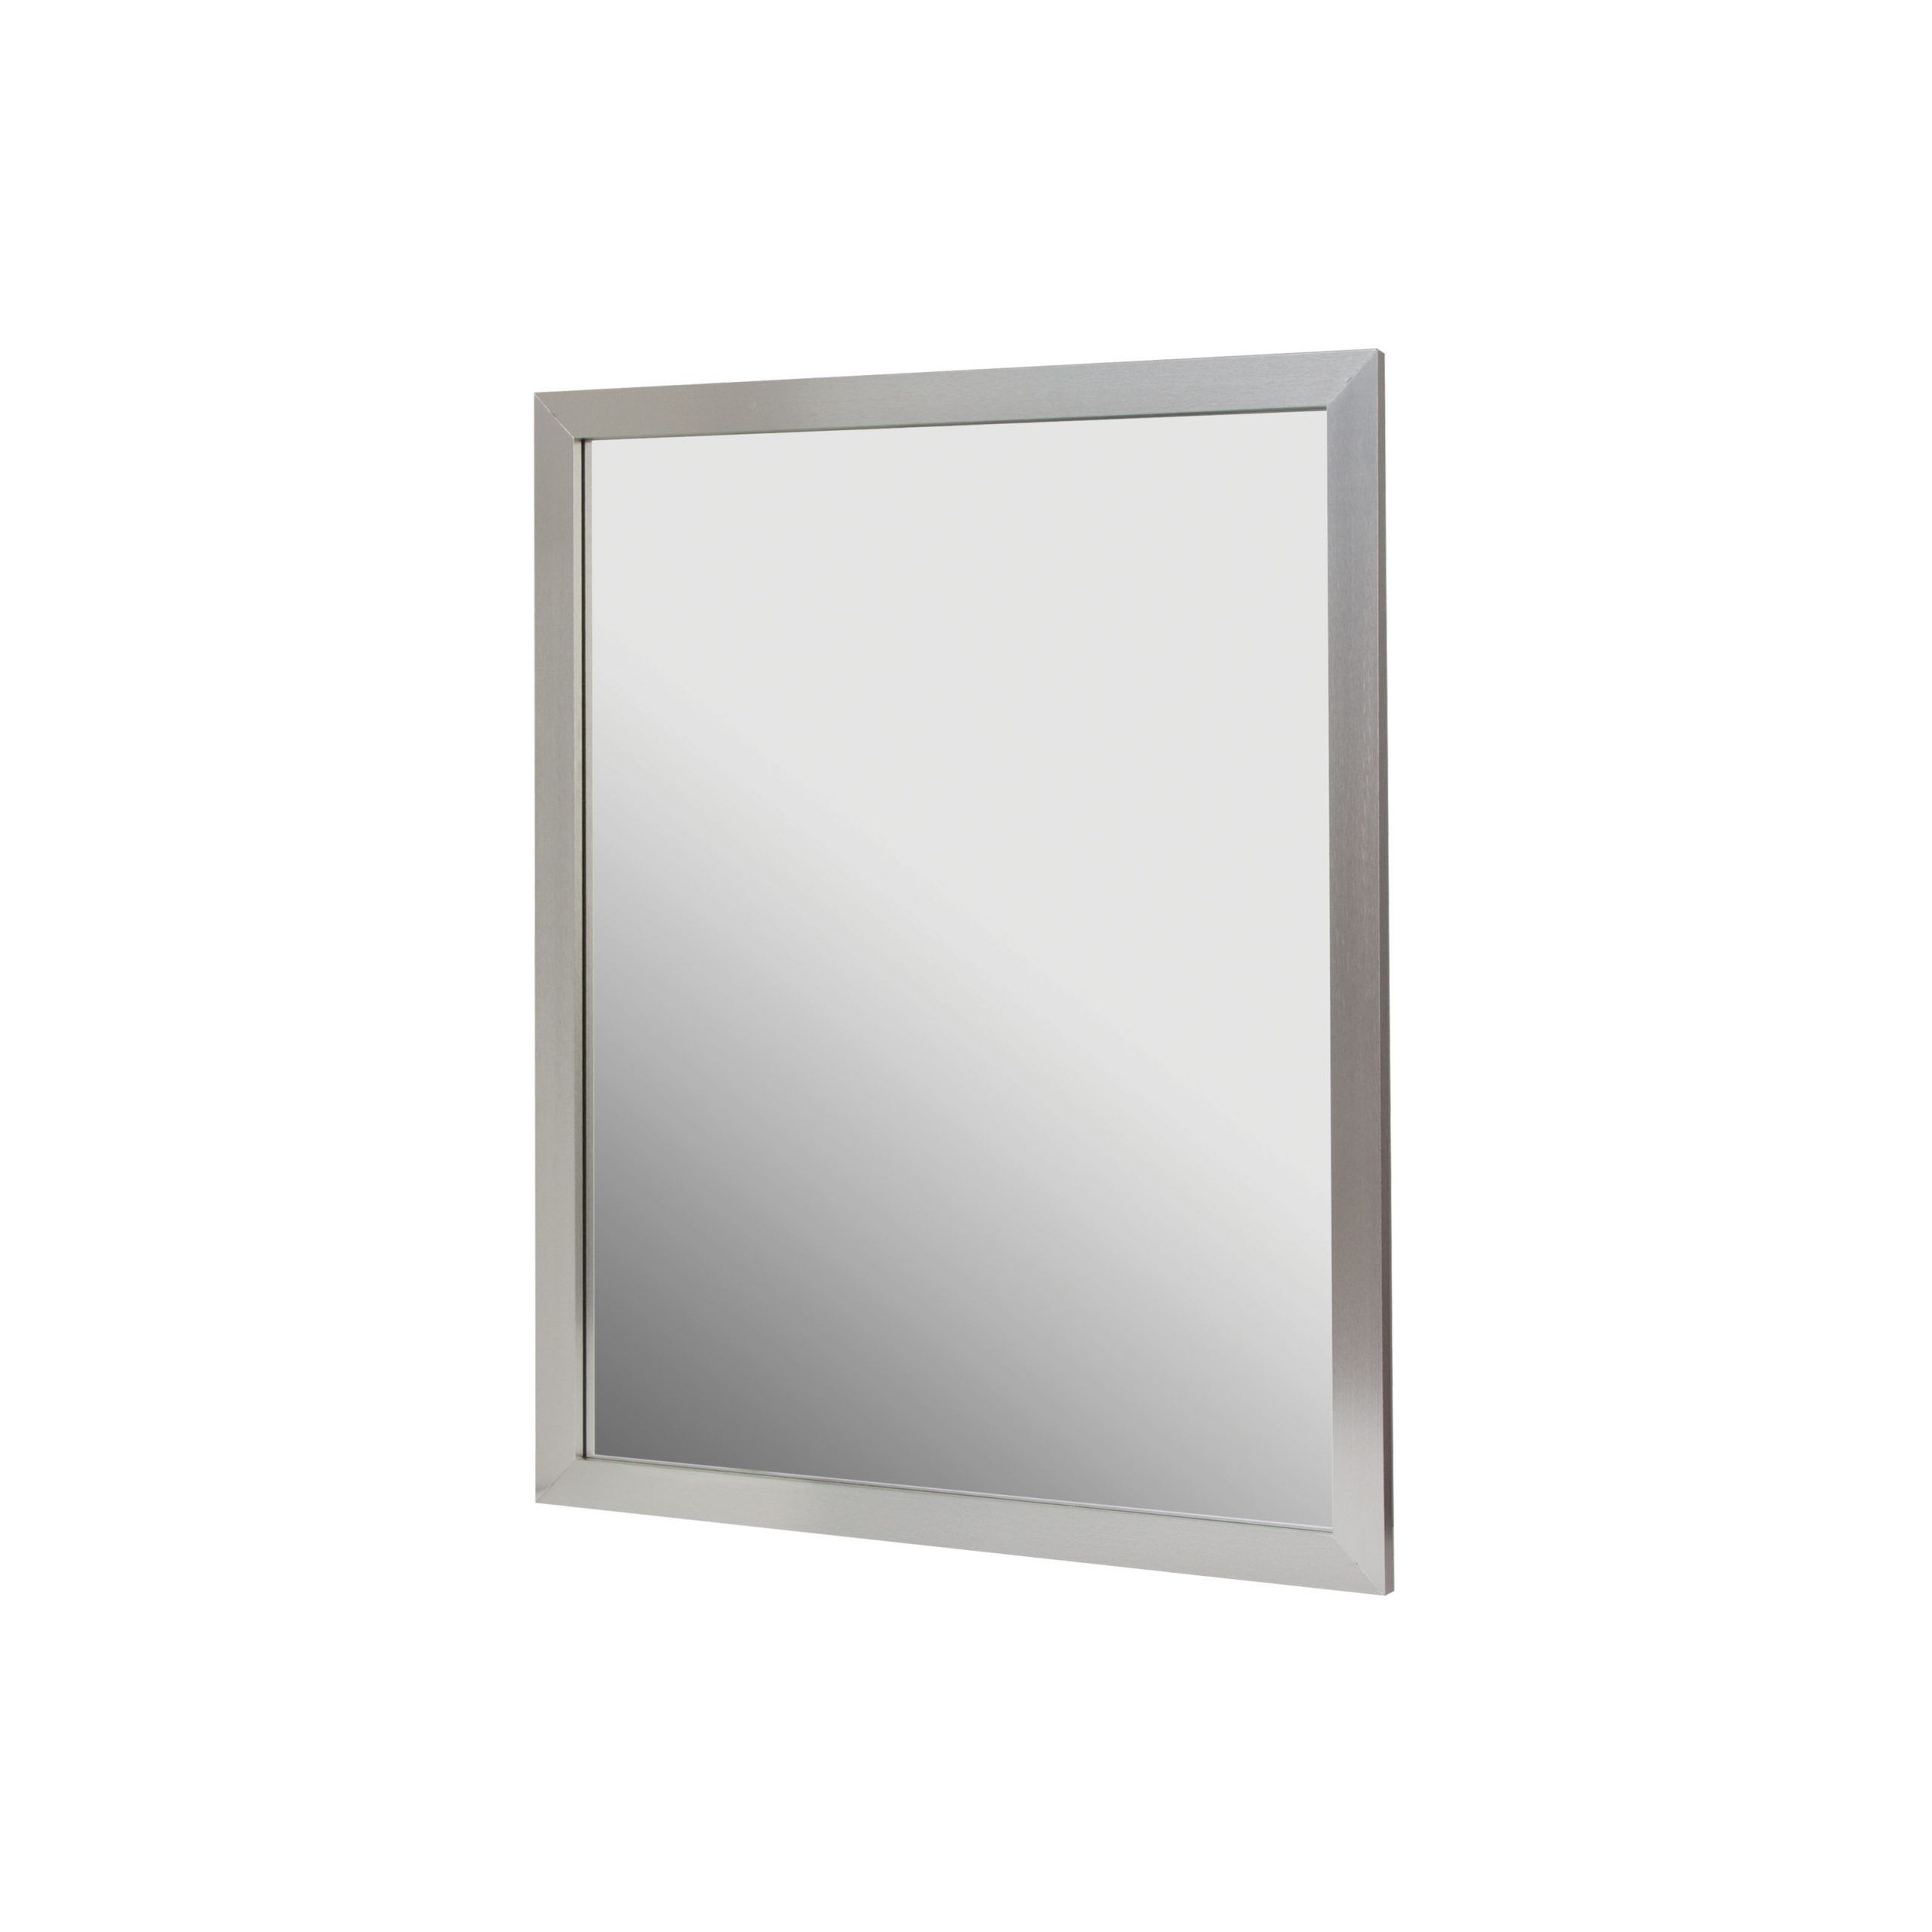 24x30 Aluminum Framed Mirror In Brushed Nickel – Foremost Bath Pertaining To Current Oxidized Nickel Wall Mirrors (View 1 of 15)